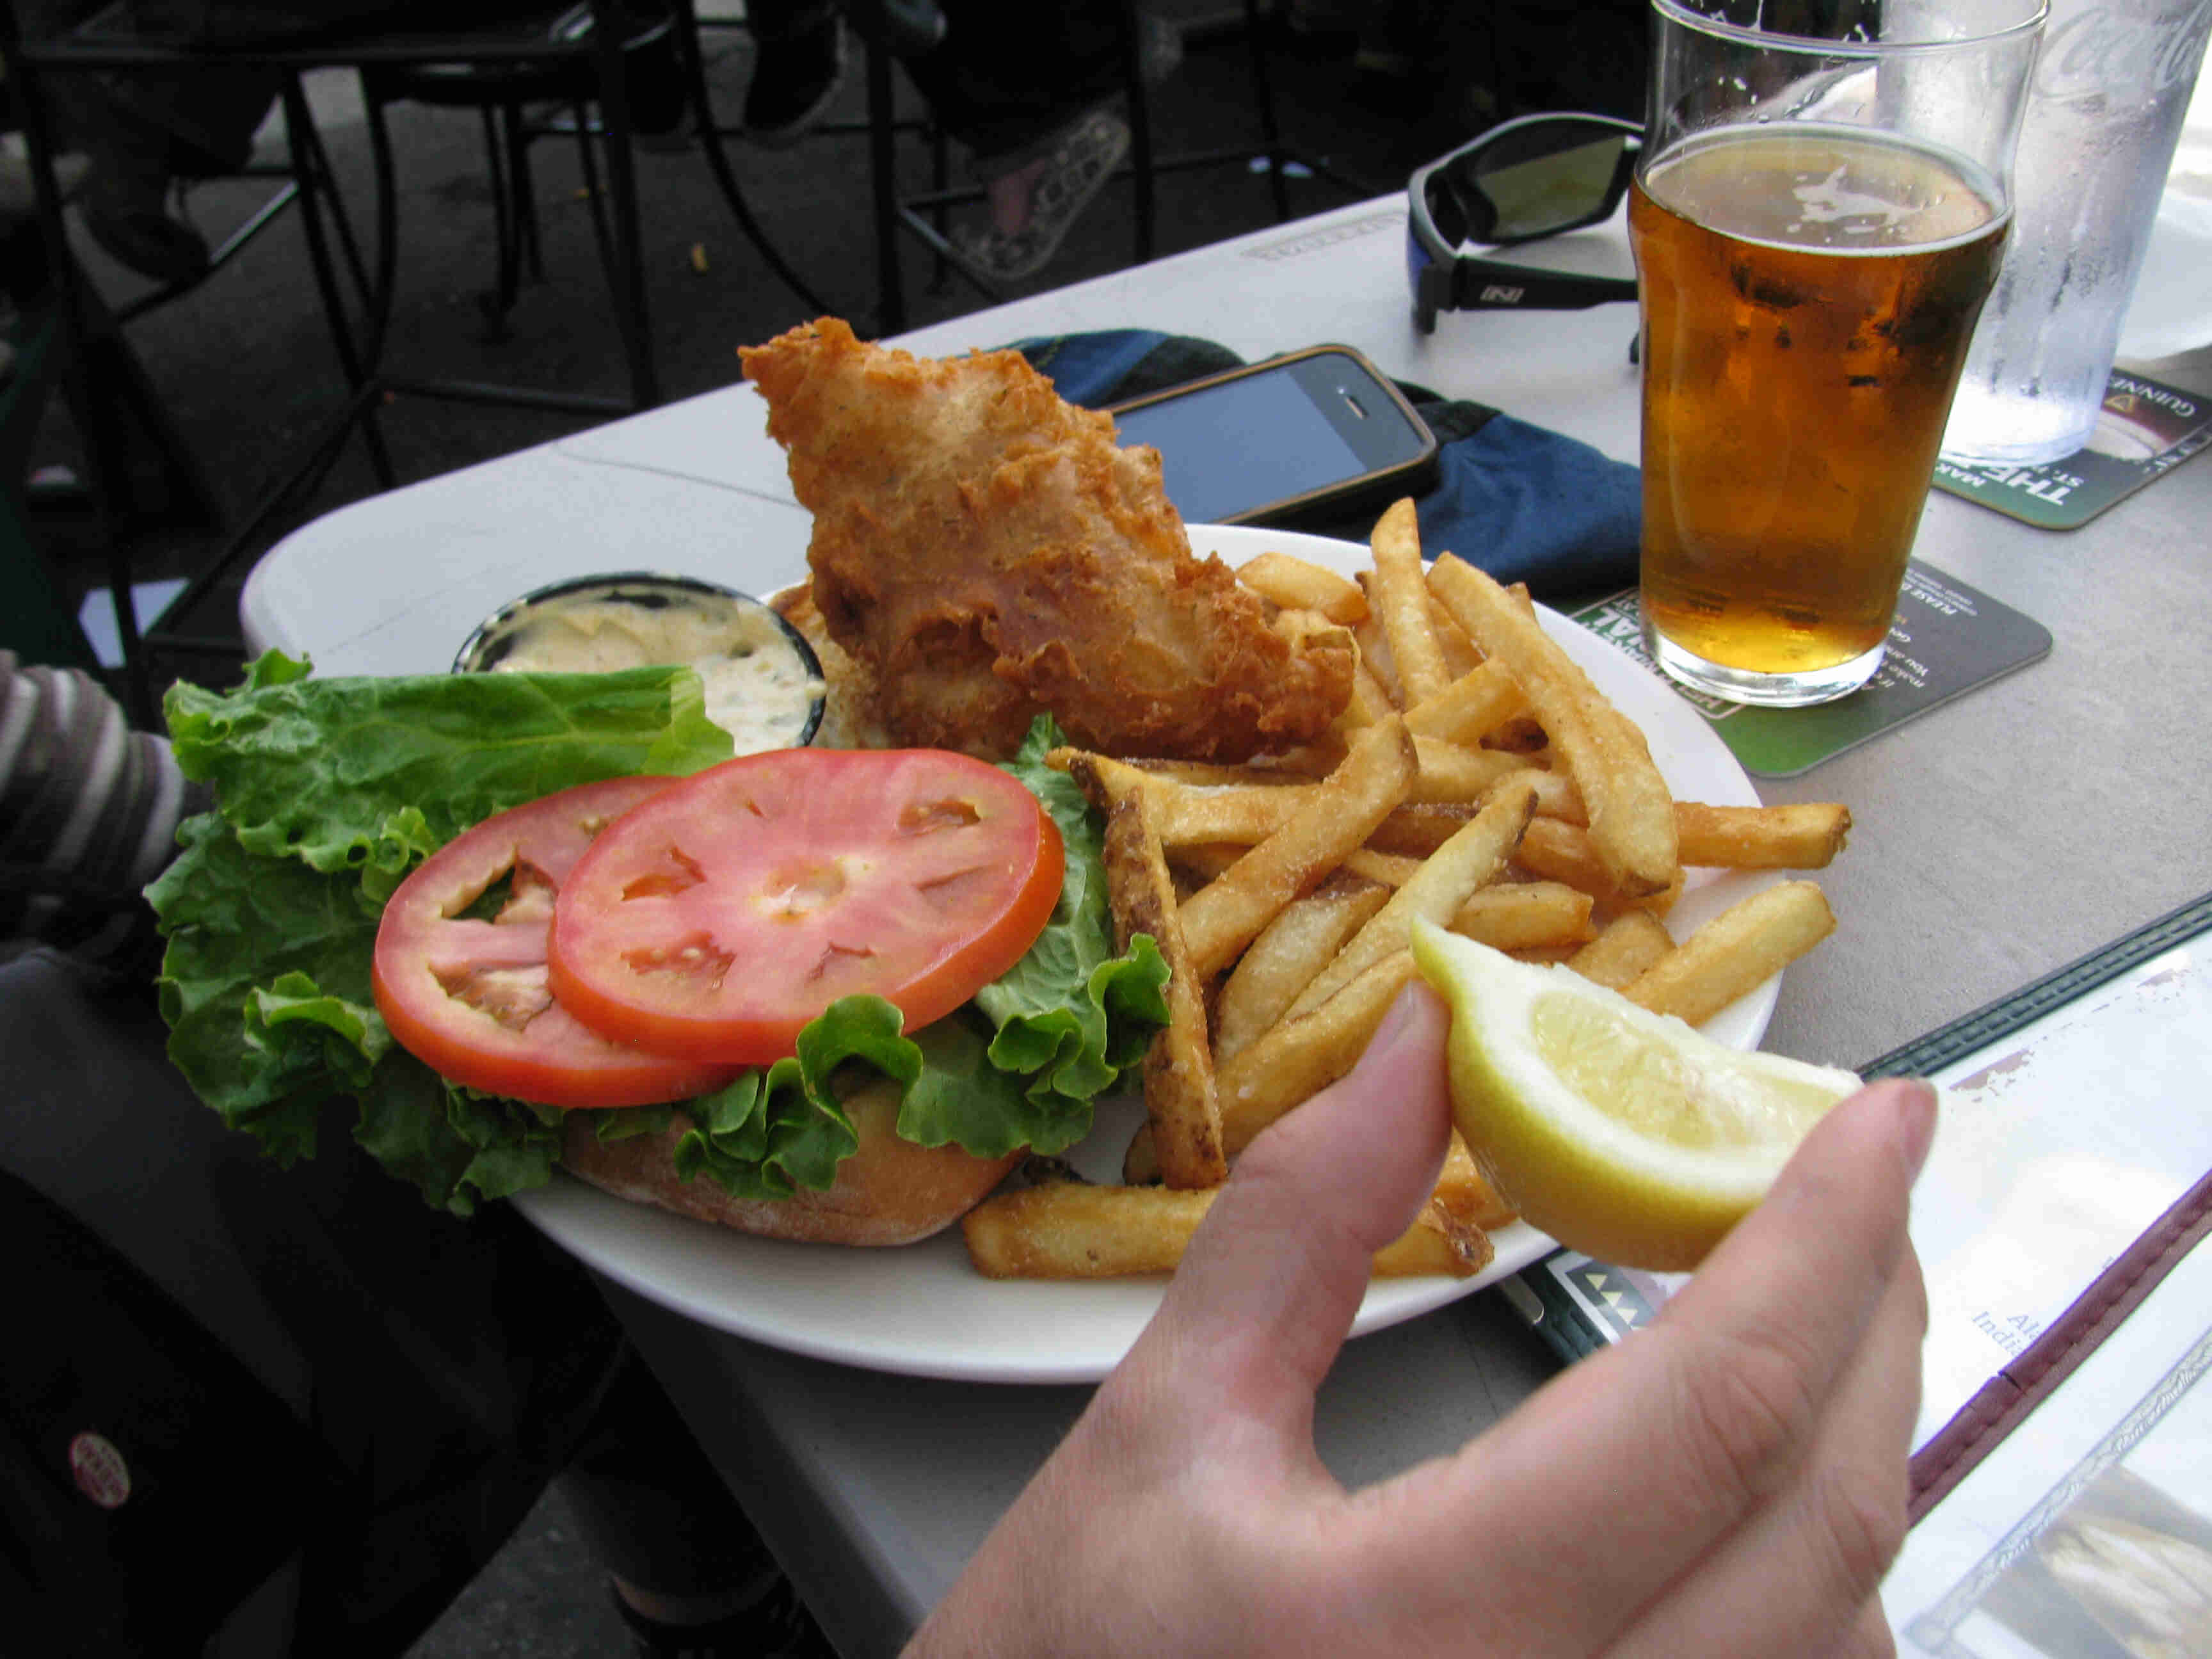 A hand holding a lemon wedge, in front of a plate of fish and fries on a table top